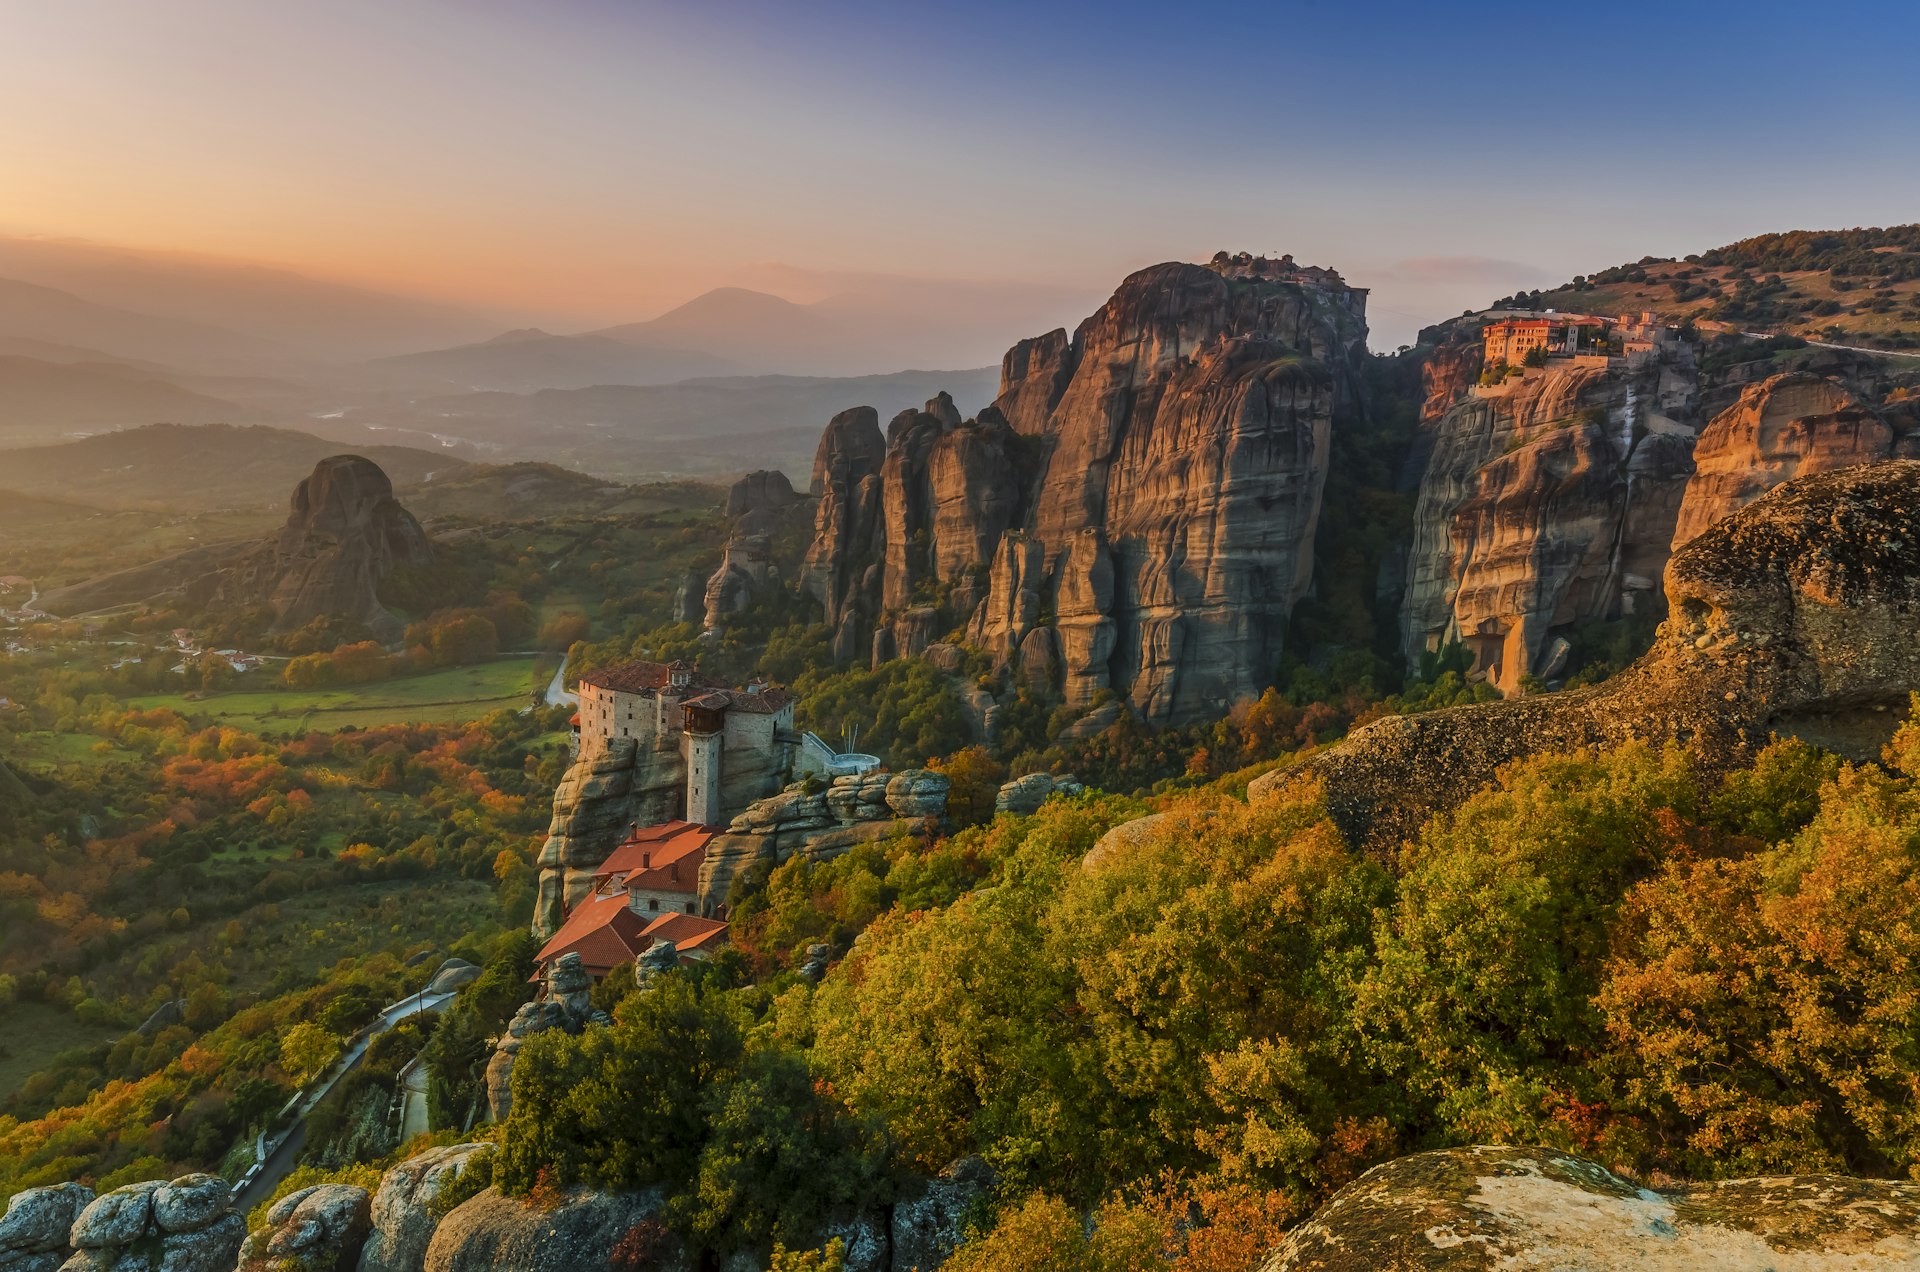 500px Photo ID: 57499892 - Twilight in Meteora Thessaly Greece